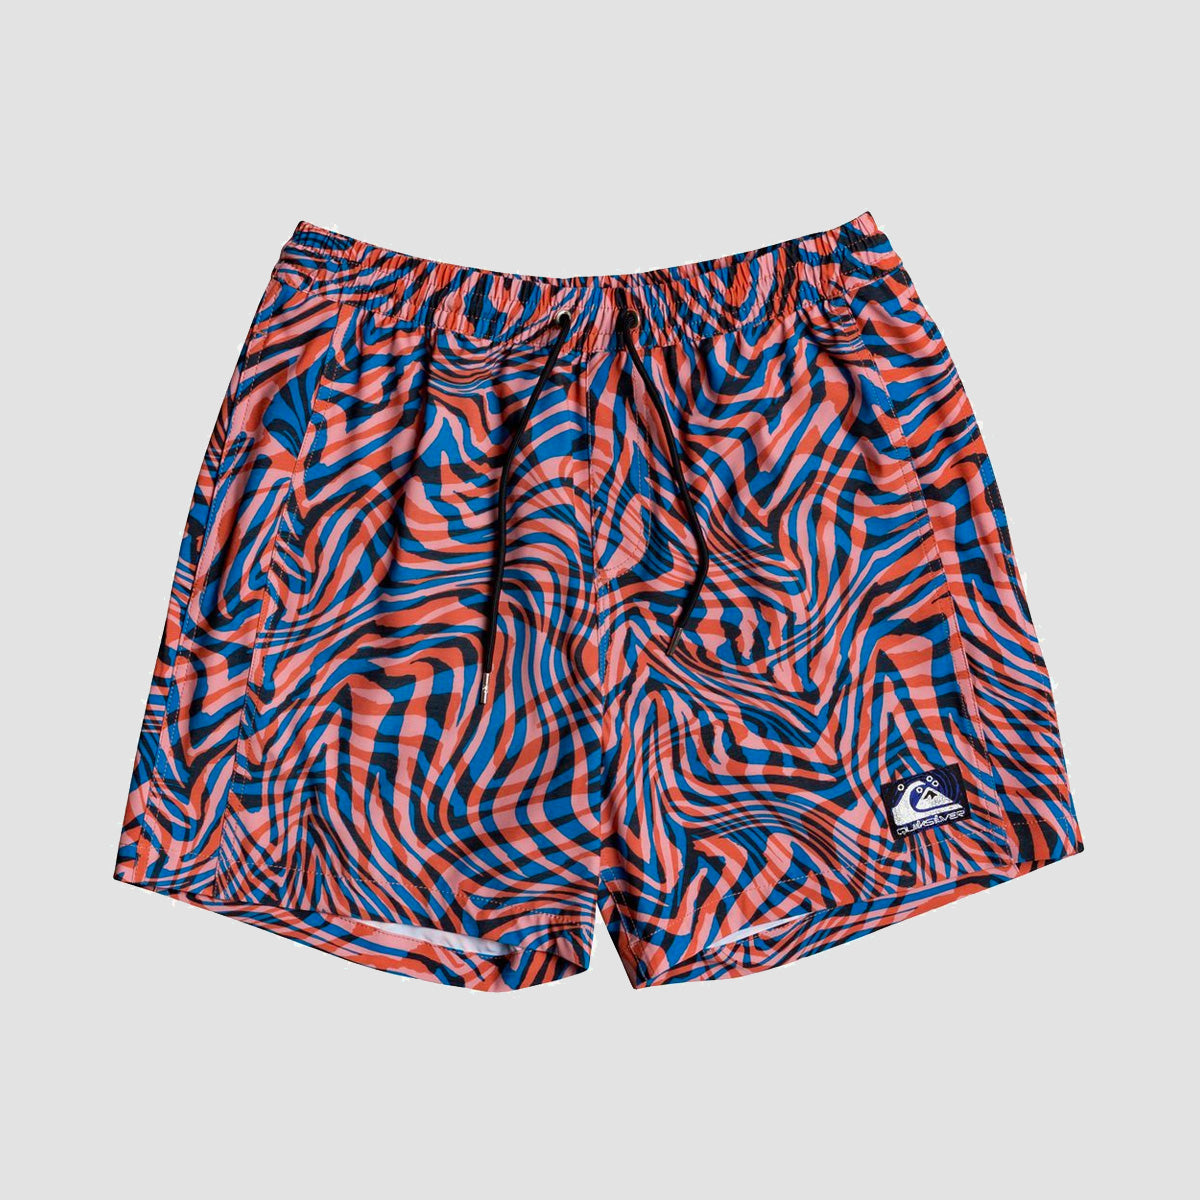 Quiksilver Out There Volley 17" Swim Short Vibrant Orange Wildlife